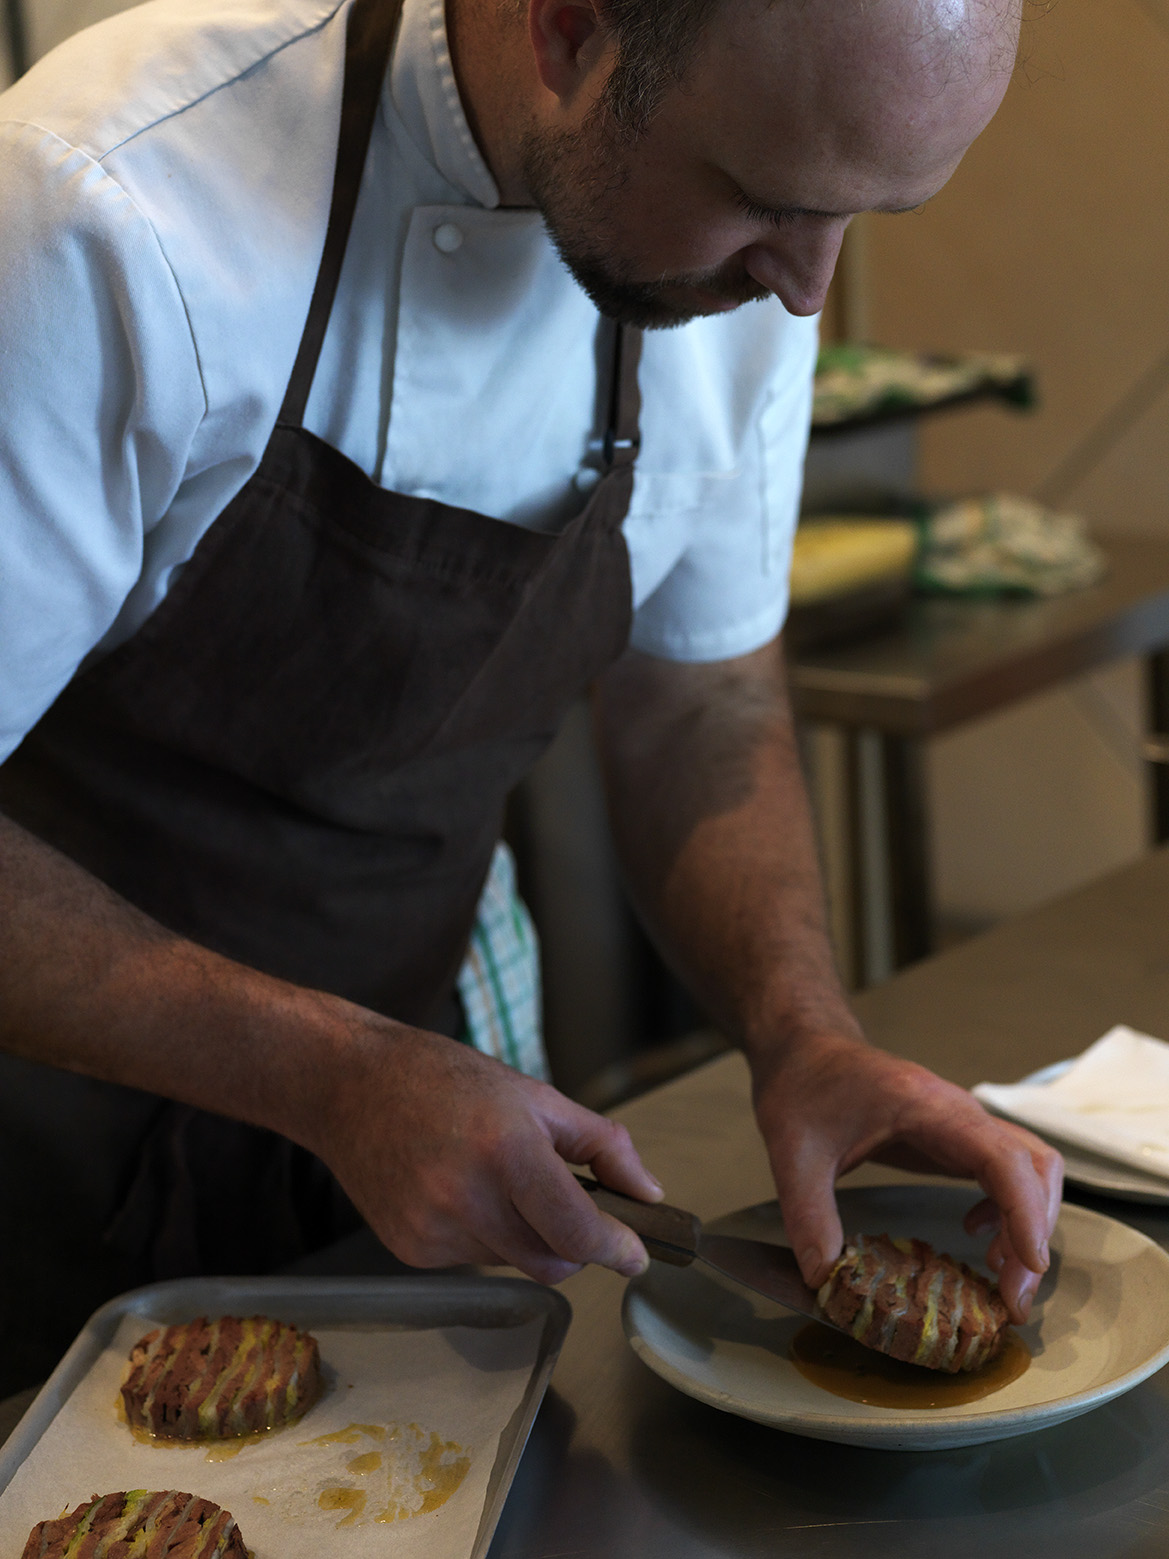 Working at Noma taught Josh to get rid of a lot of arbitrary processes from his cooking.